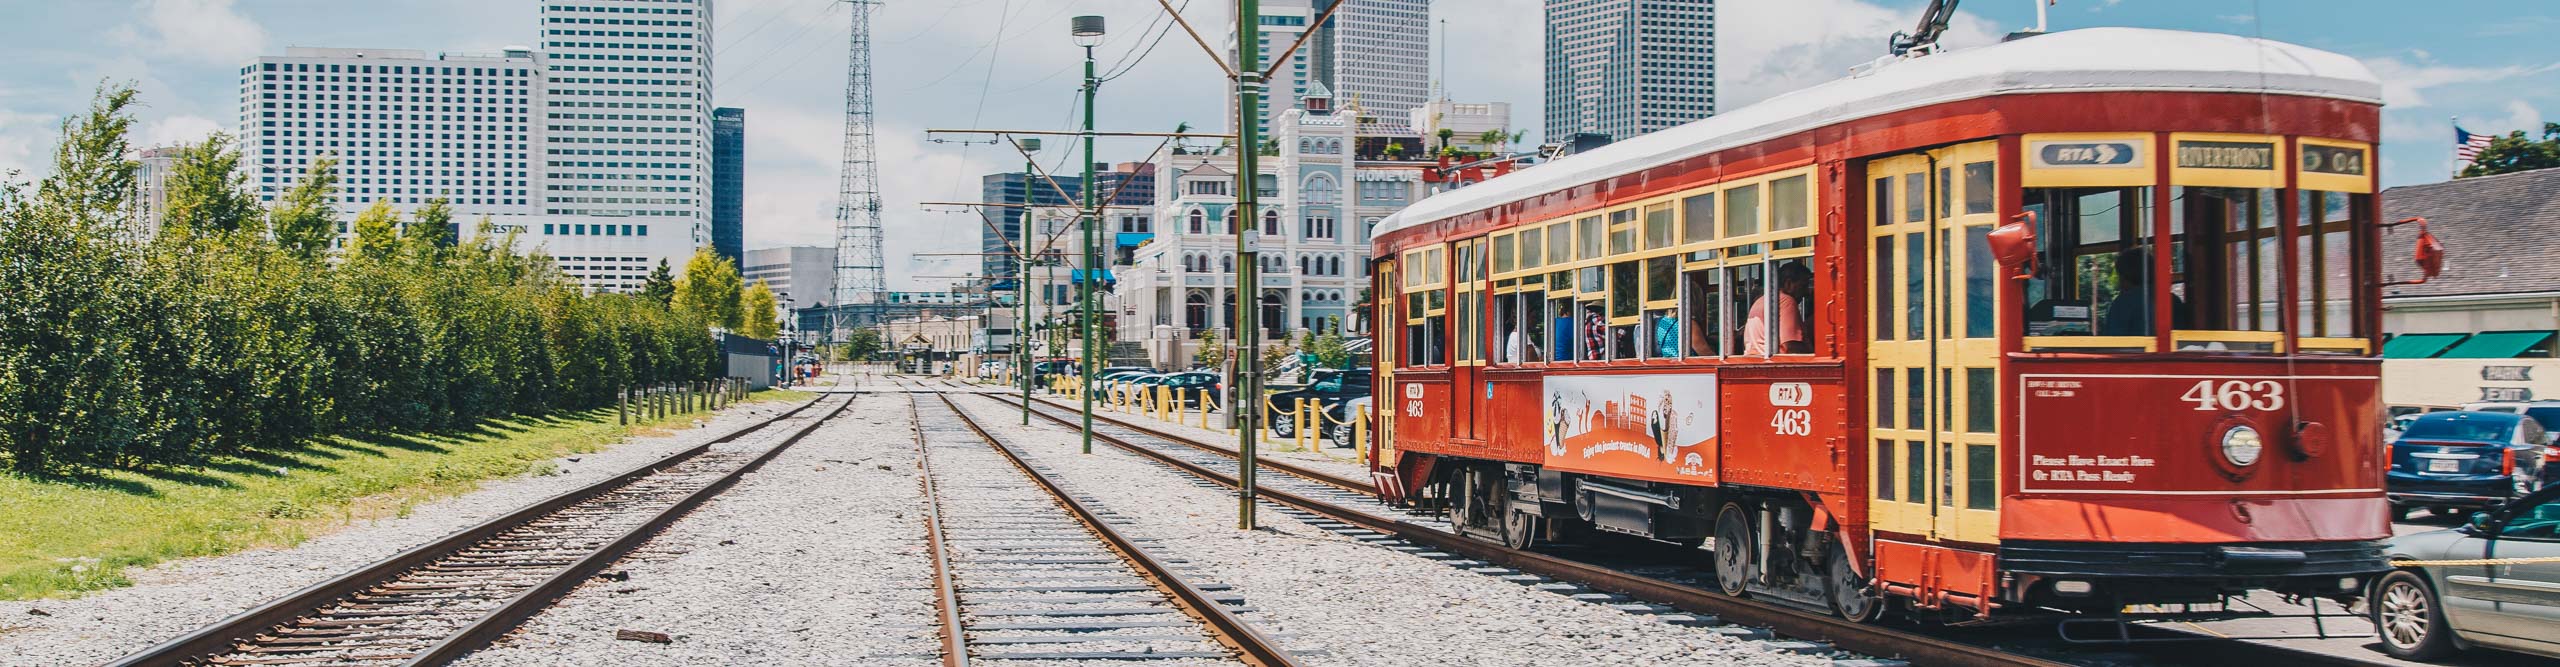 Tram going through the streets of New Orleans, Louisiana, USA